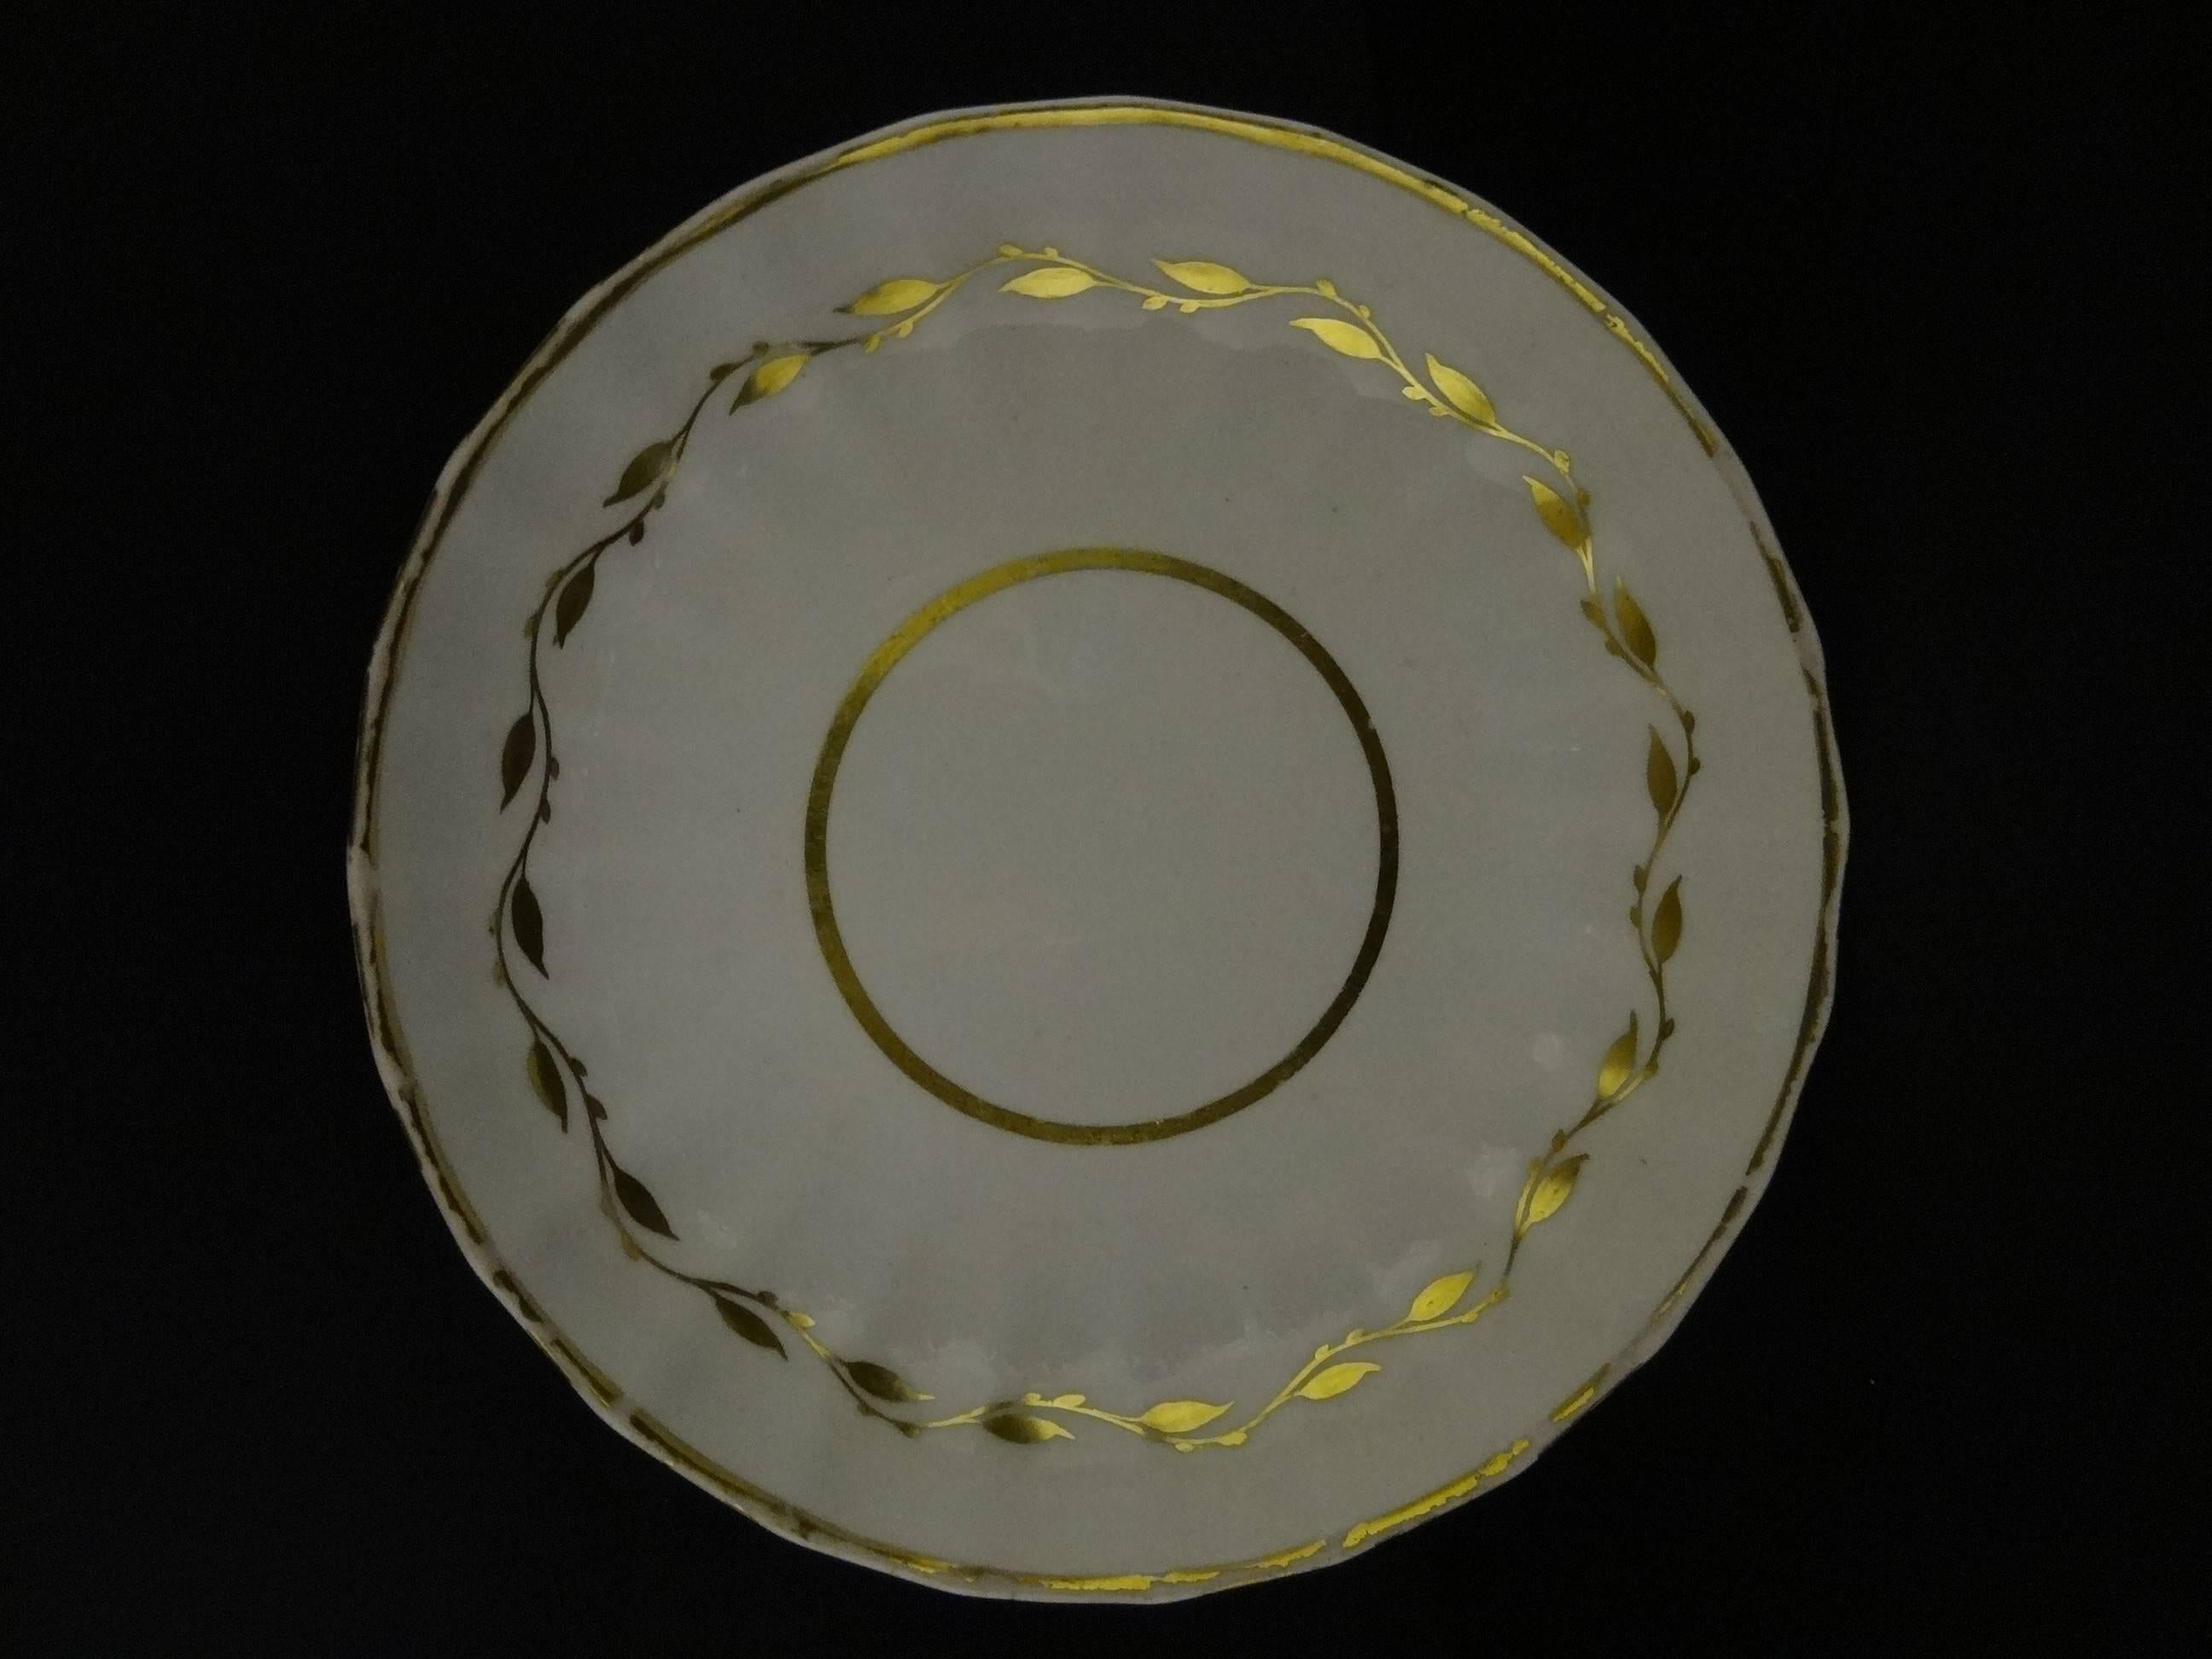 A ribbed derby cup and saucer.

Cup: h 6.40 cm, d 7.60 cm. 

Saucer: h 2.90 cm, d 14.30 cm.